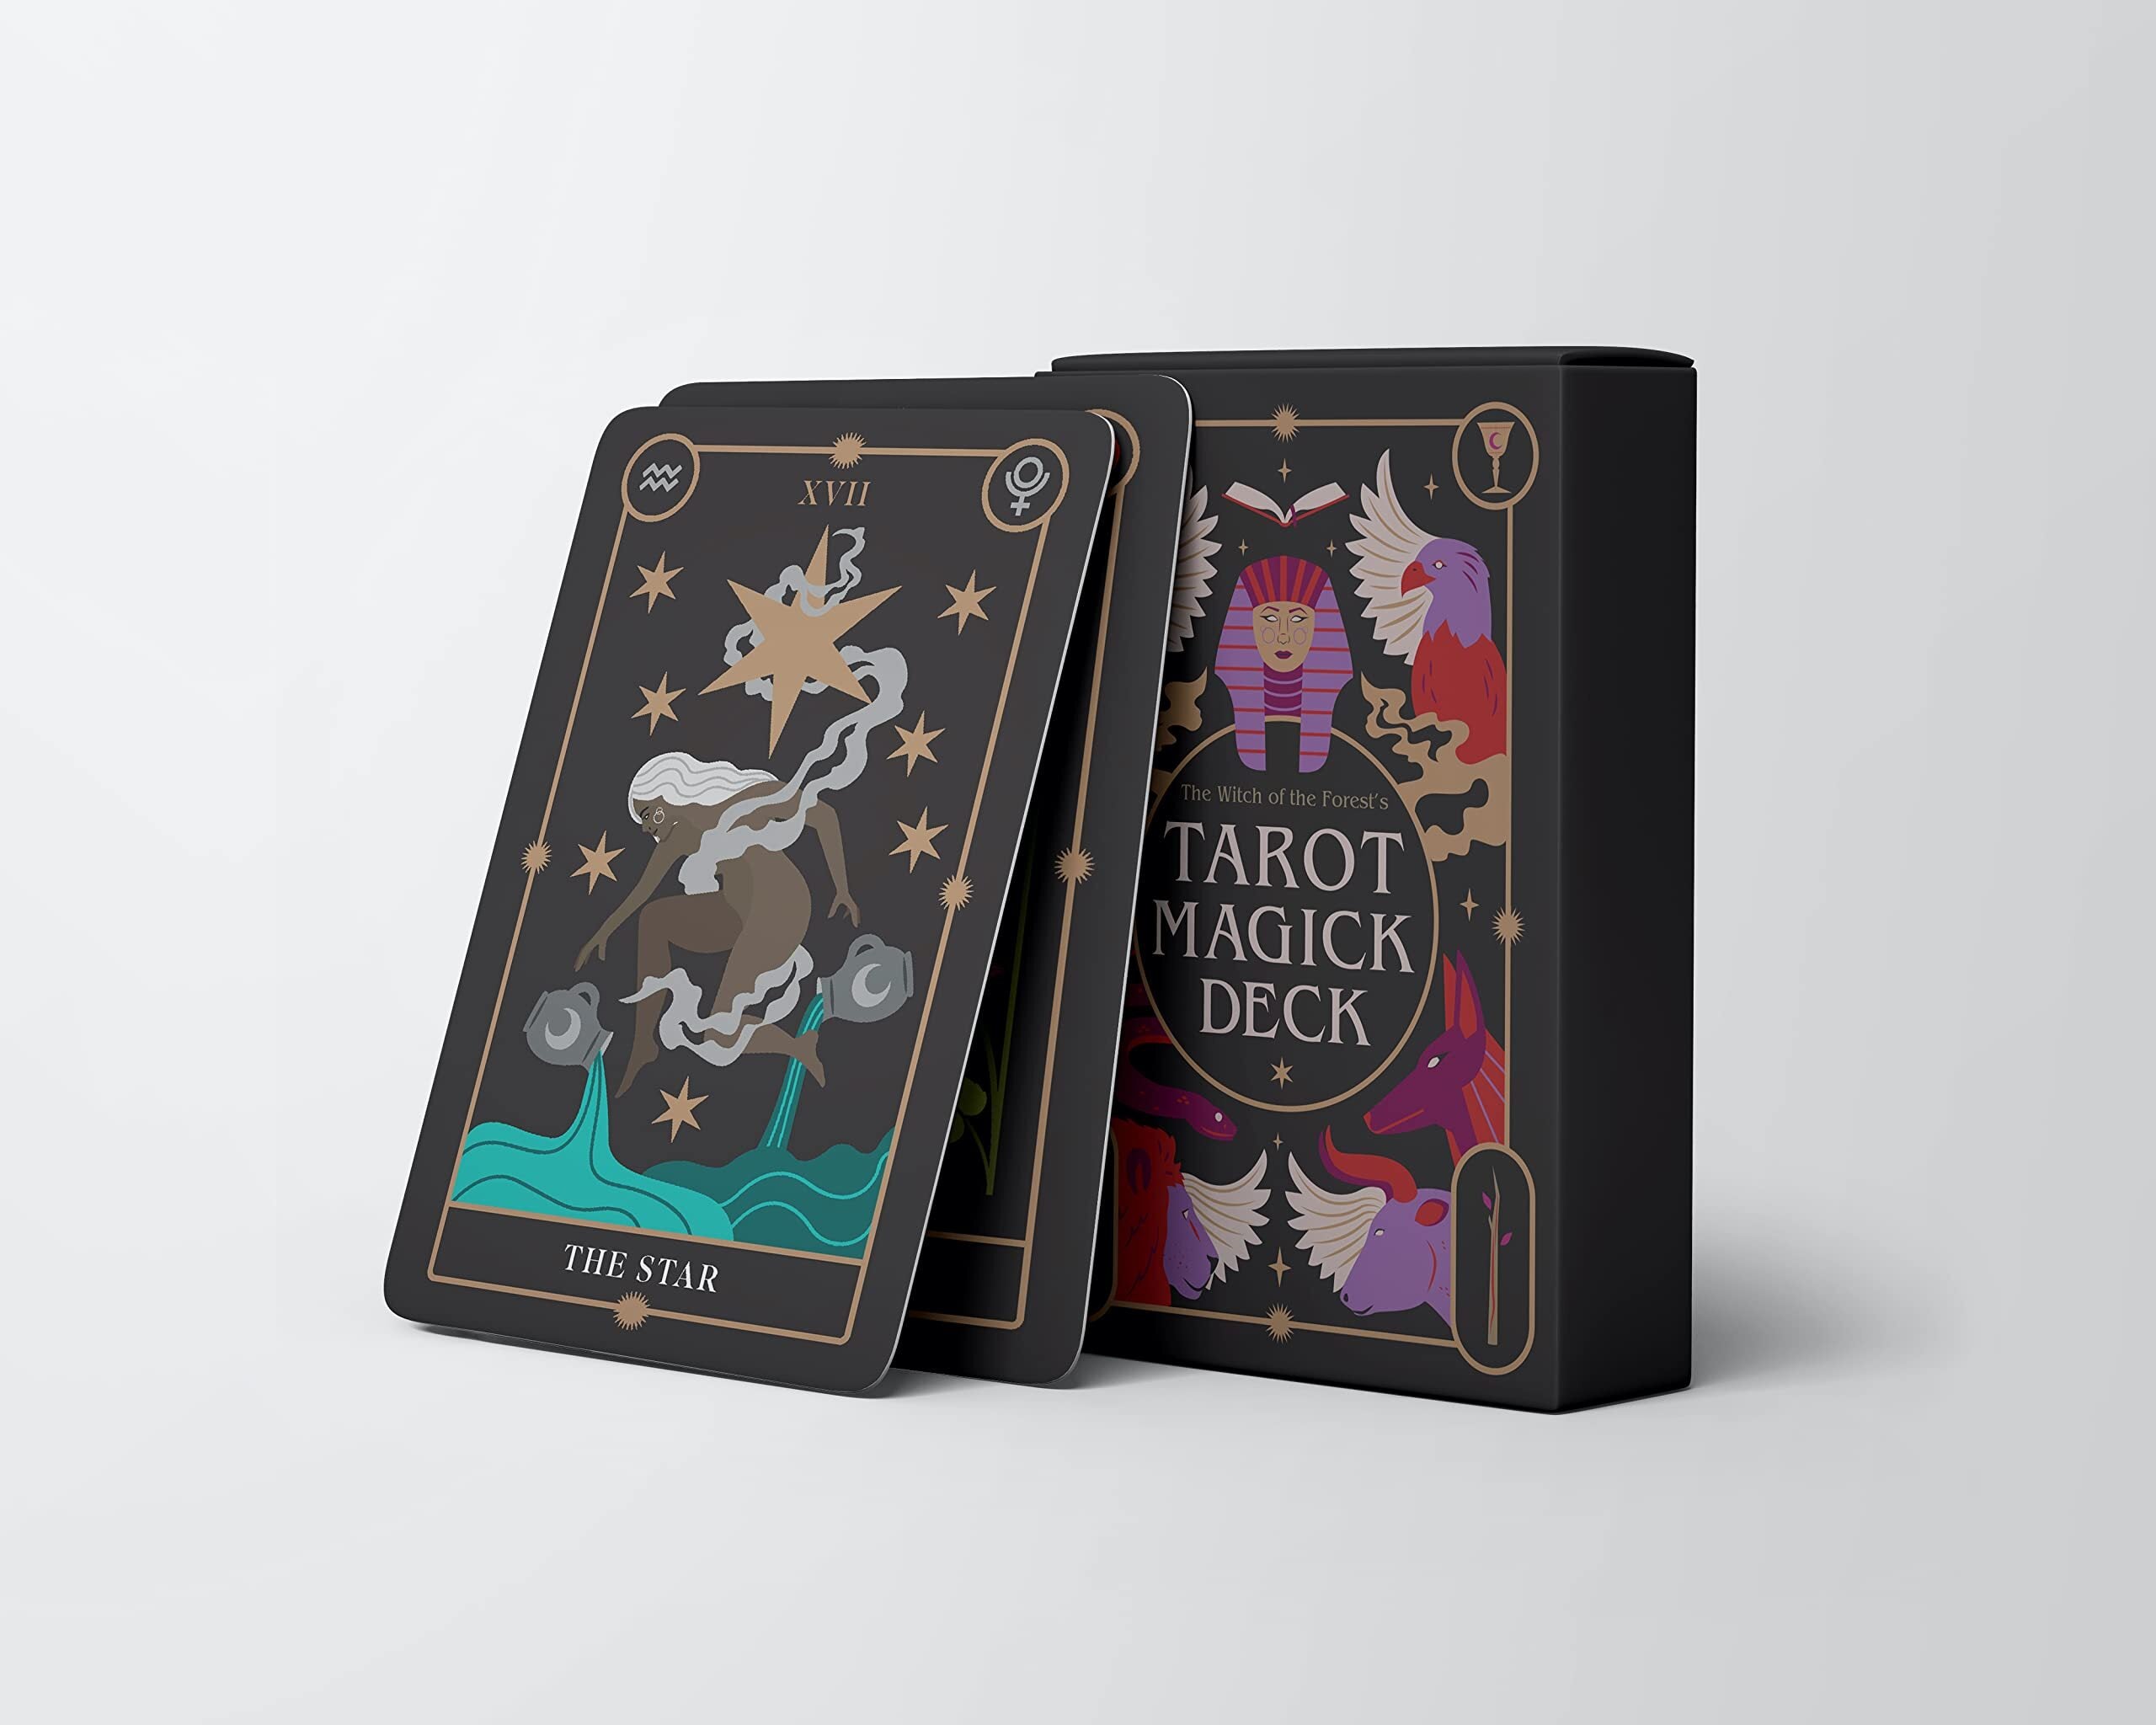 The Witch of the Forest's Tarot Magic Deck